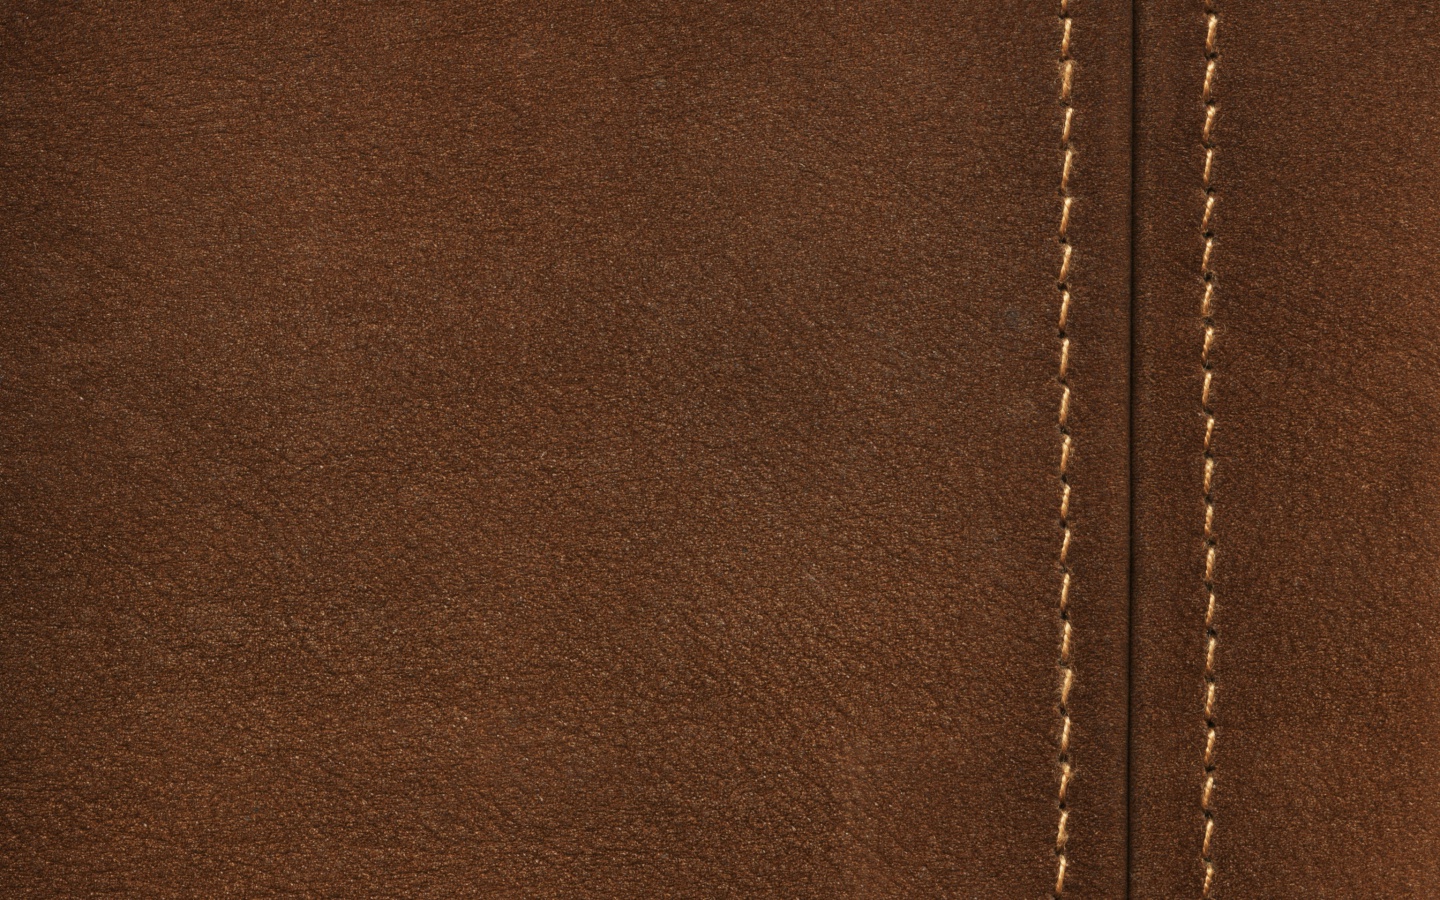 Das Brown Leather with Seam Wallpaper 1440x900